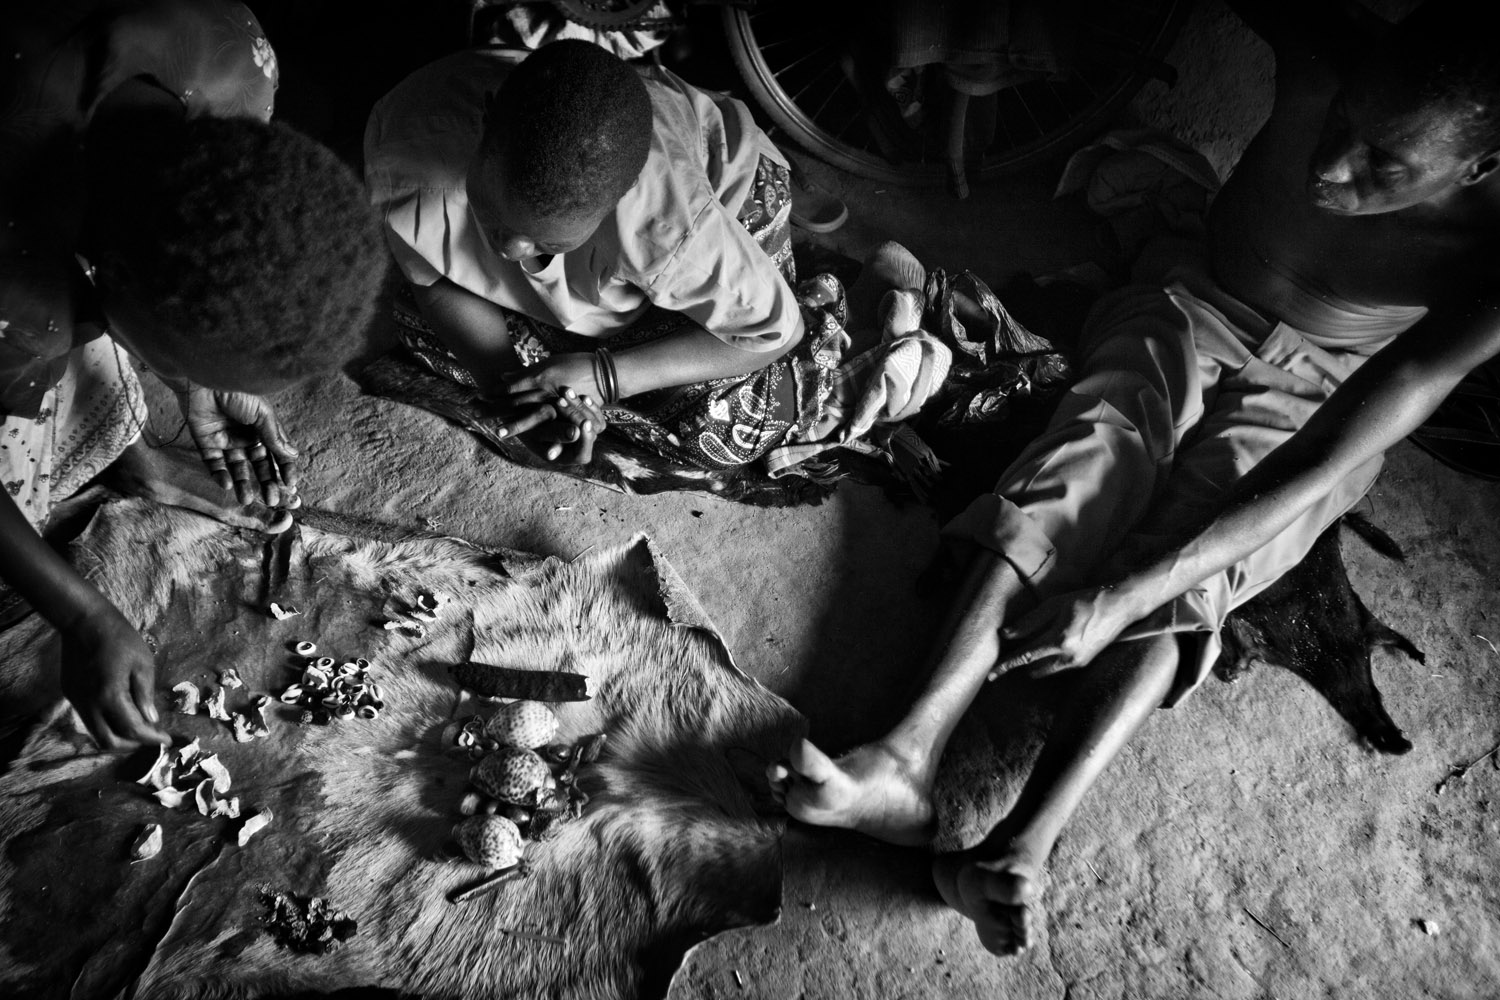 A Witch Doctor diagnoses a patient with mental illness by reading the way pieces of bone and shell fall on a goats skin. Northern Uganda. March 2011.